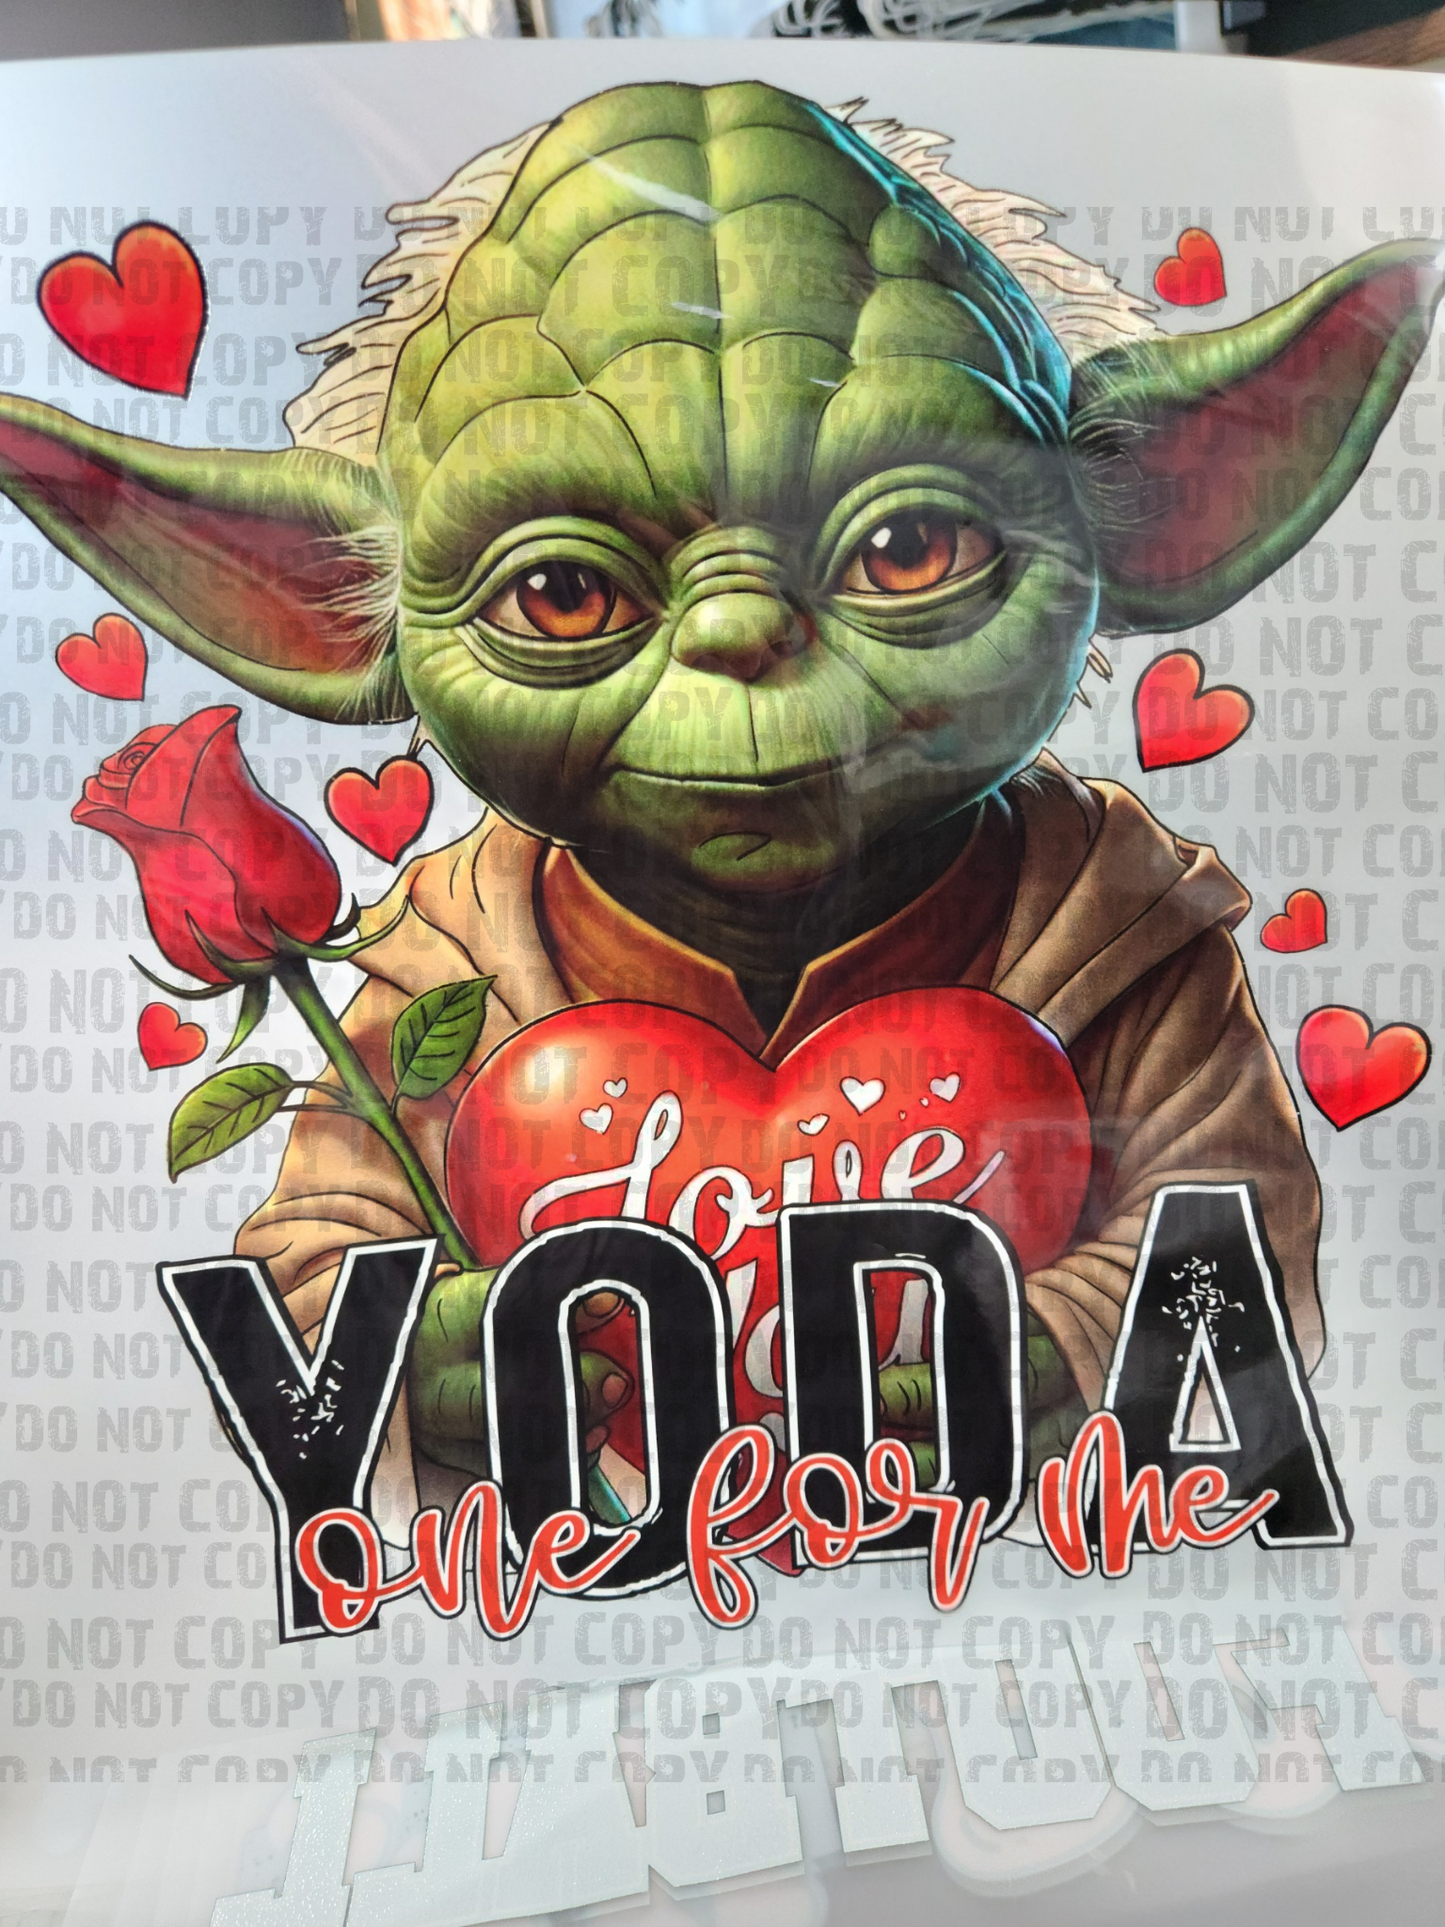 Yoda the one for me